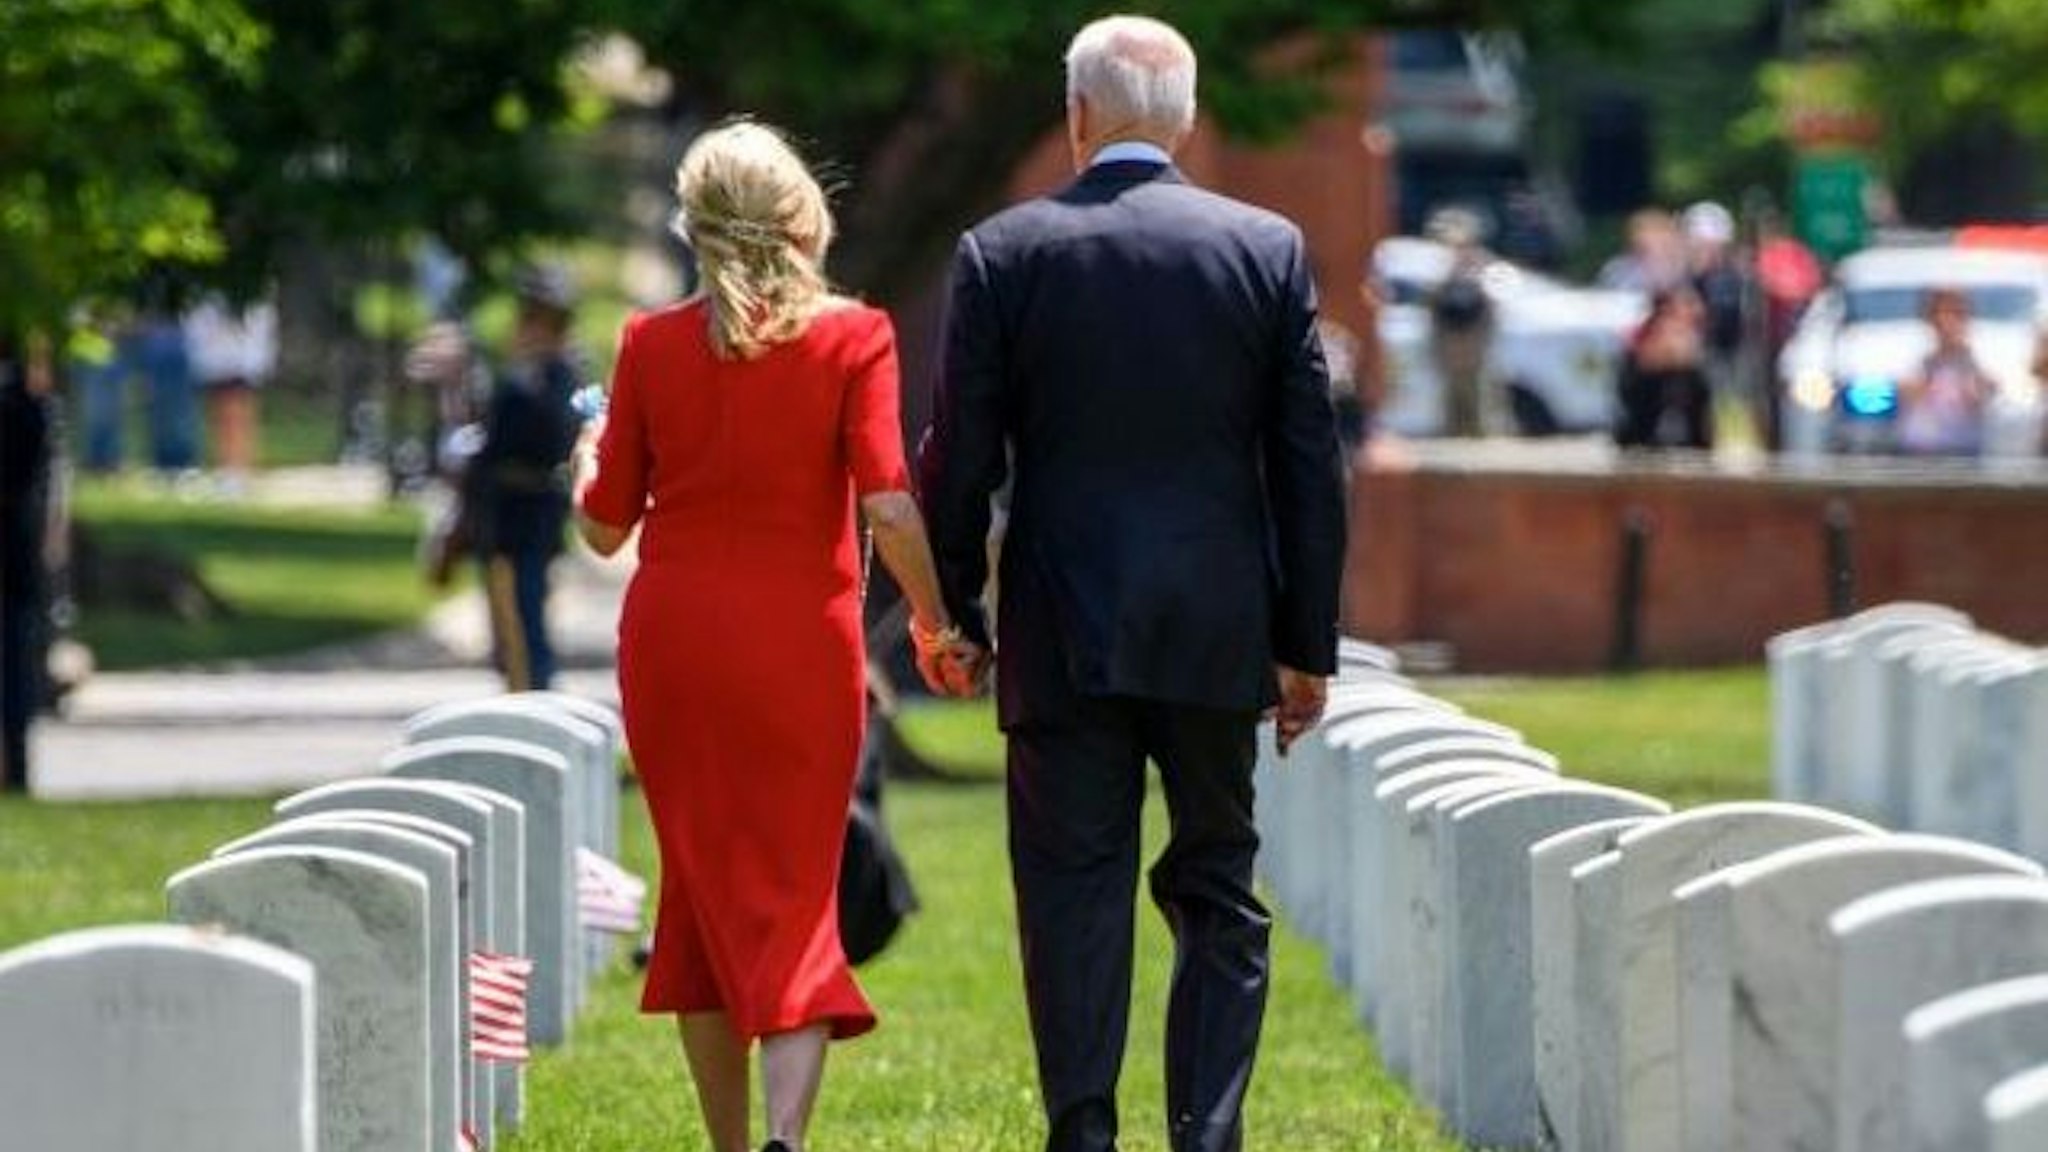 US President Joe Biden and First Lady Jill Biden walk through Section 12 of Arlington National Cemetery, after the 153rd National Memorial Day Observance on Memorial Day in Arlington, Virginia on May 31, 2021. (Photo by MANDEL NGAN / AFP) (Photo by MANDEL NGAN/AFP via Getty Images)